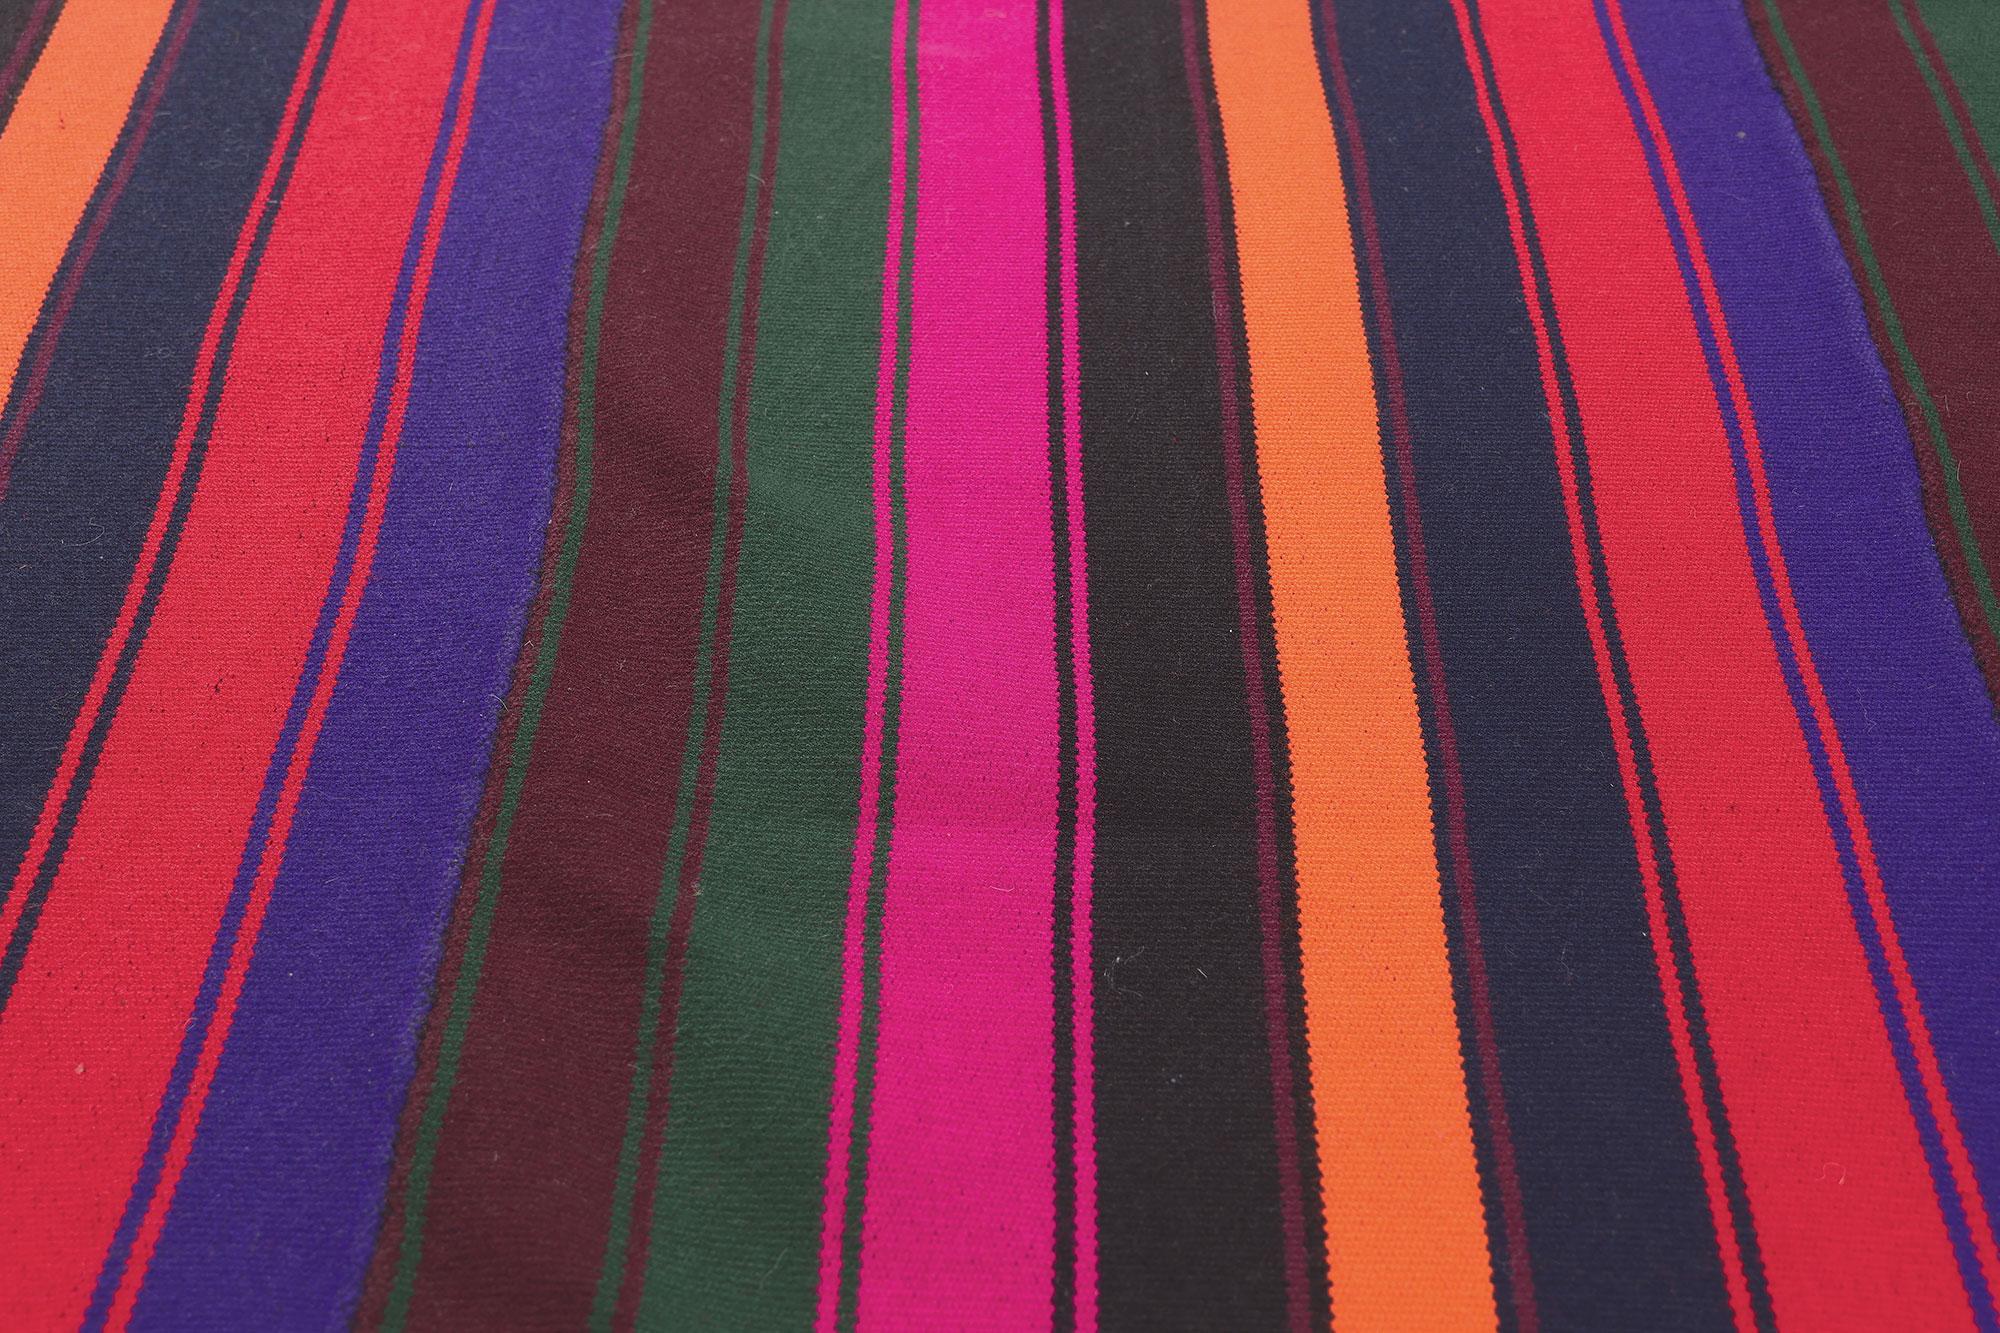 Bright Bold Vintage and Modern Handwoven Striped Kilim Rug In Good Condition For Sale In Dallas, TX